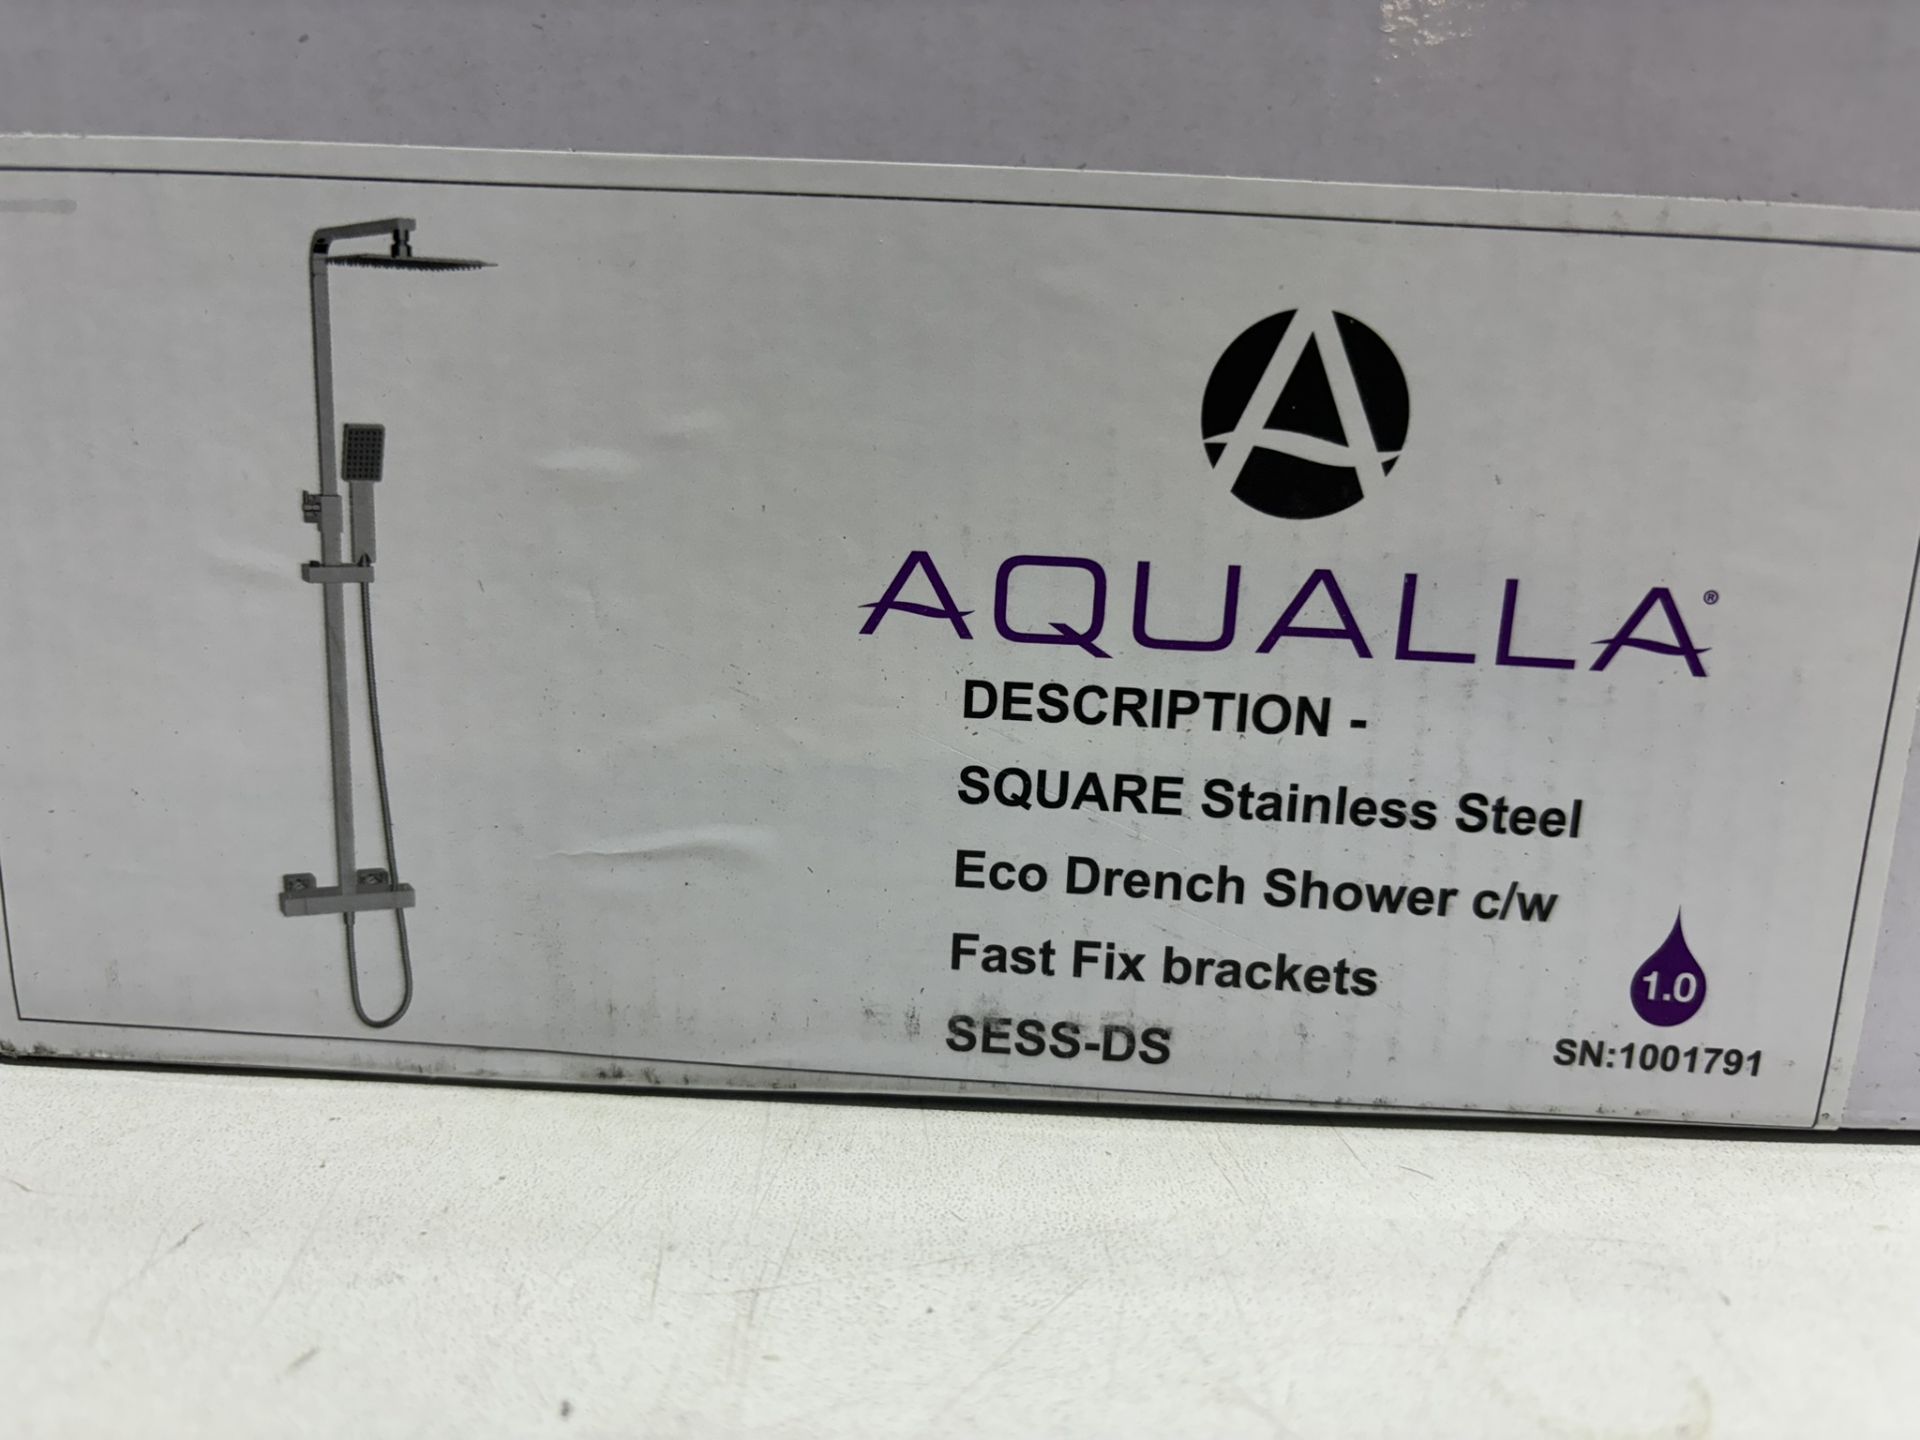 Aqualla SESS-DS Square Stainless Steel Eco Drench Shower c/w Fast Fit Brackets - Bild 2 aus 4